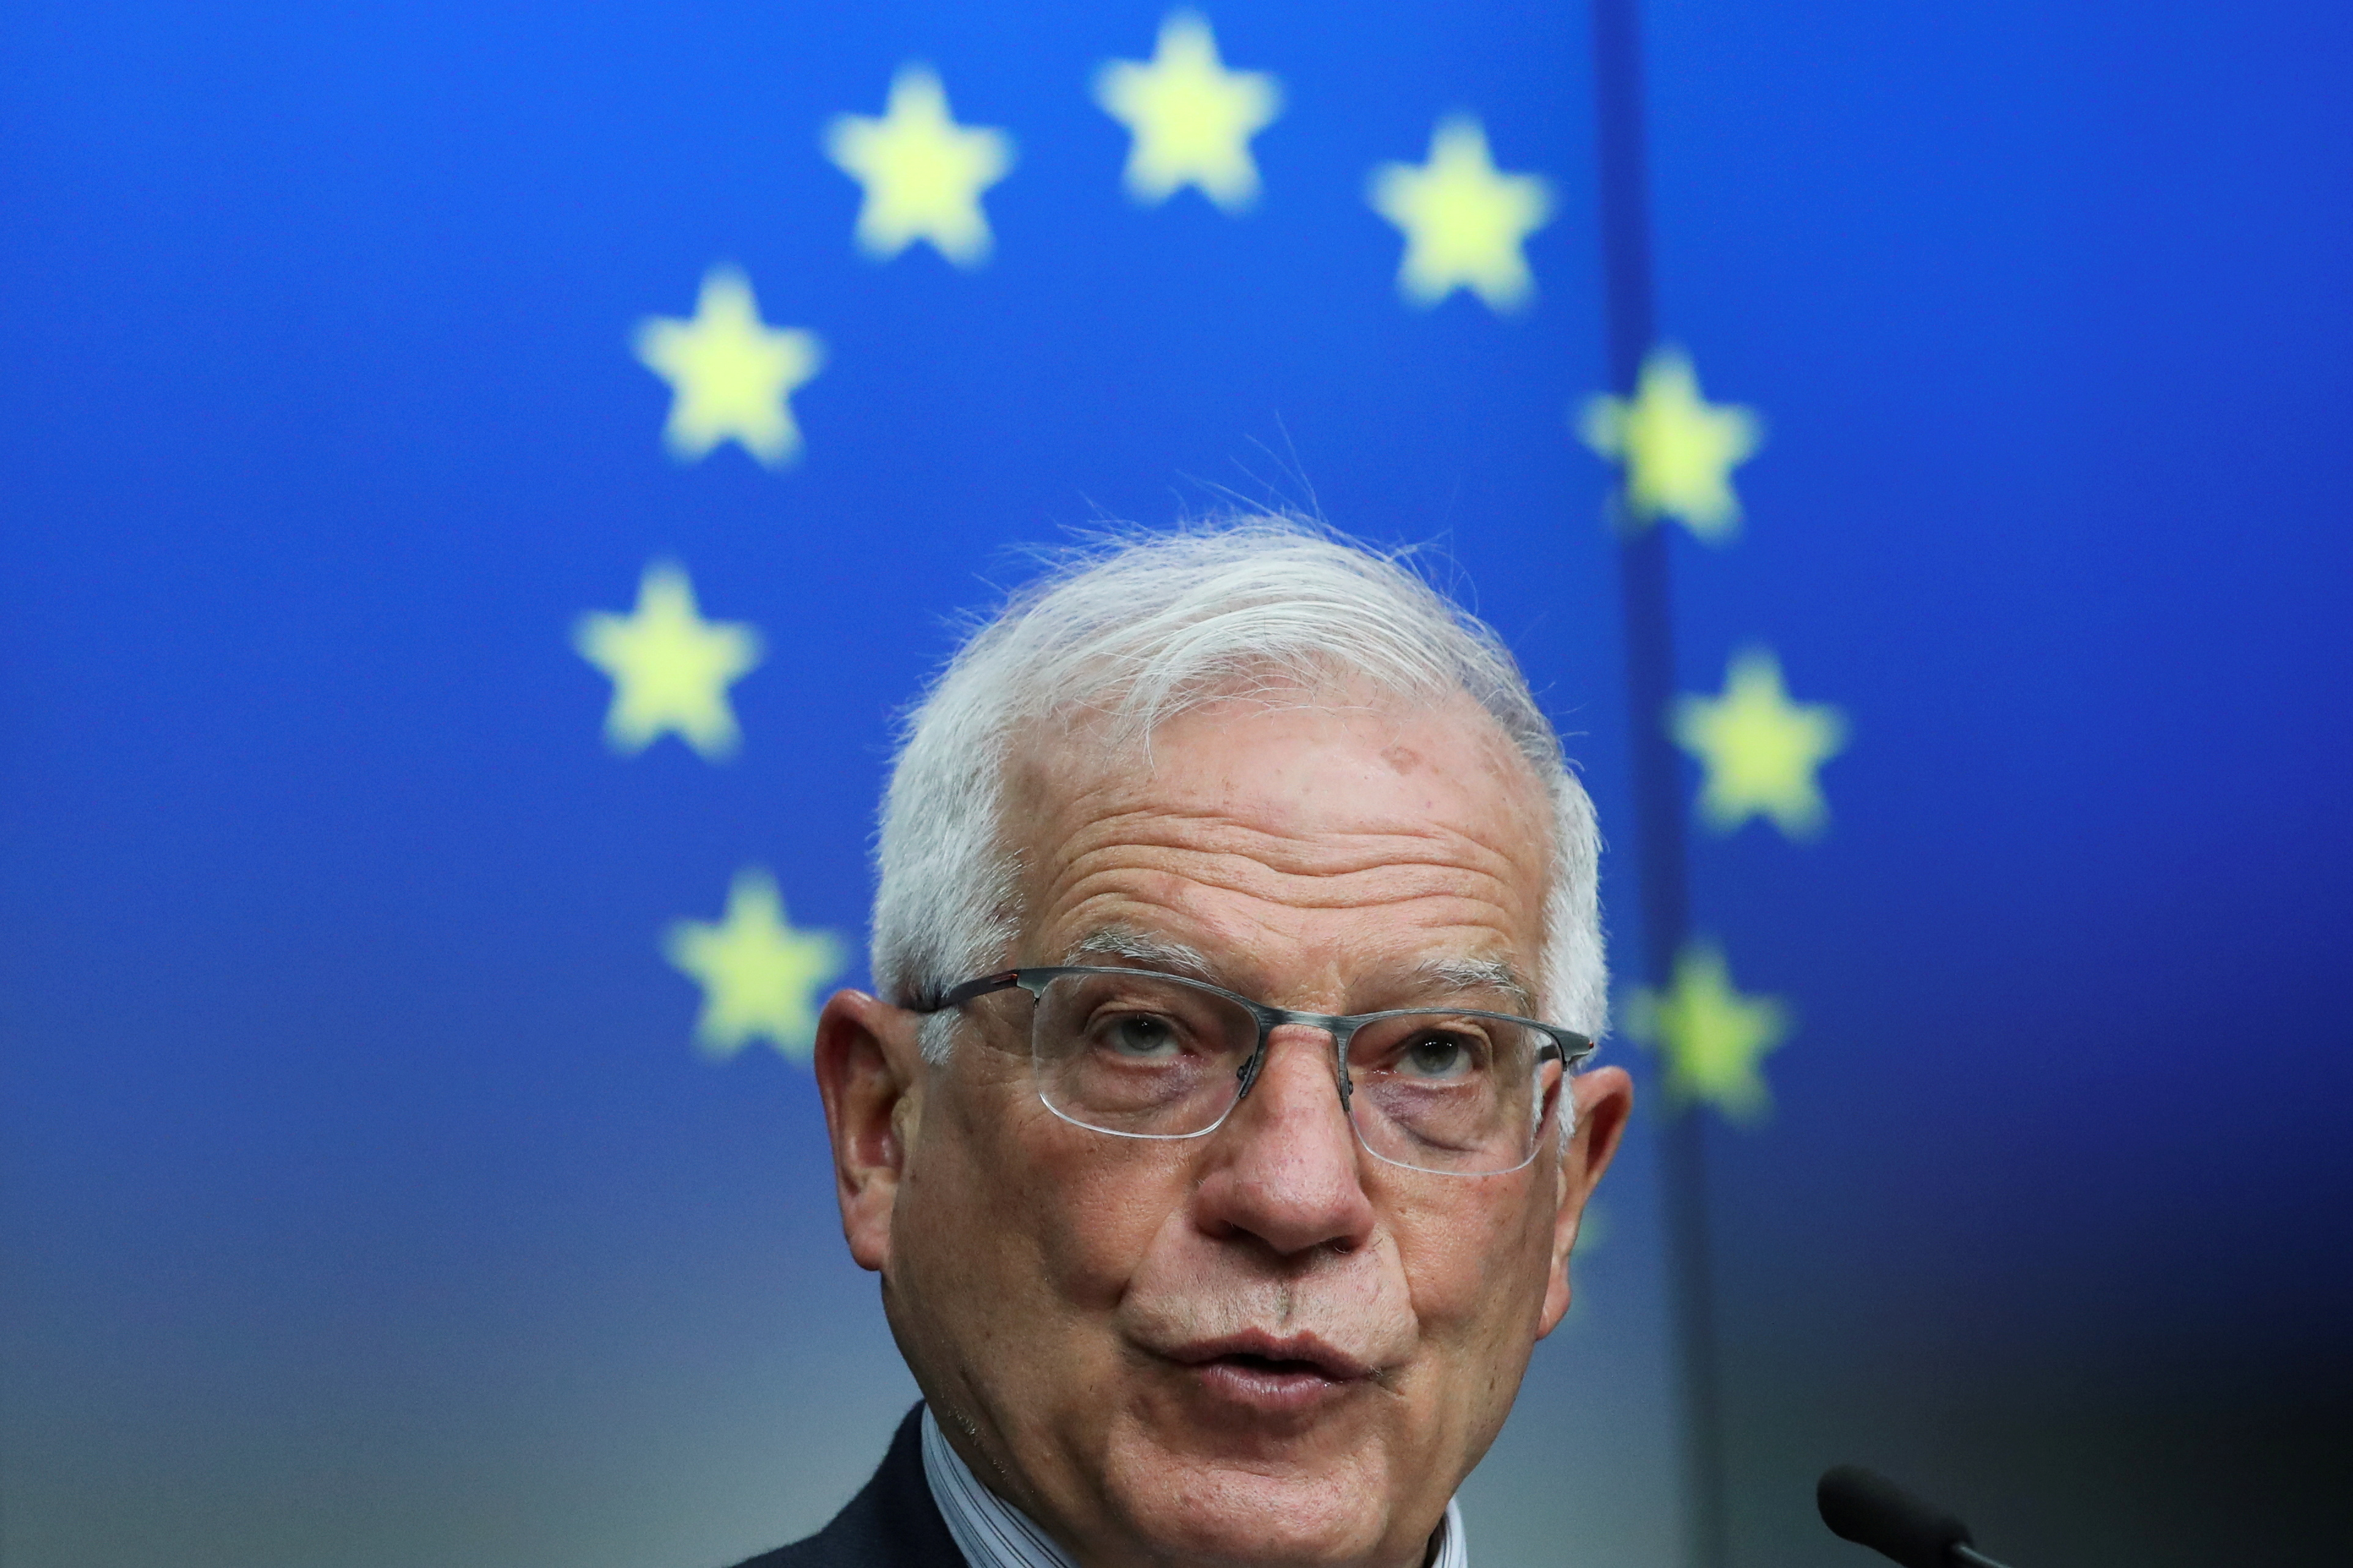 EU High Representative for Foreign Affairs Borrell and Georgia's PM Garibashvili hold a news conference in Brussels